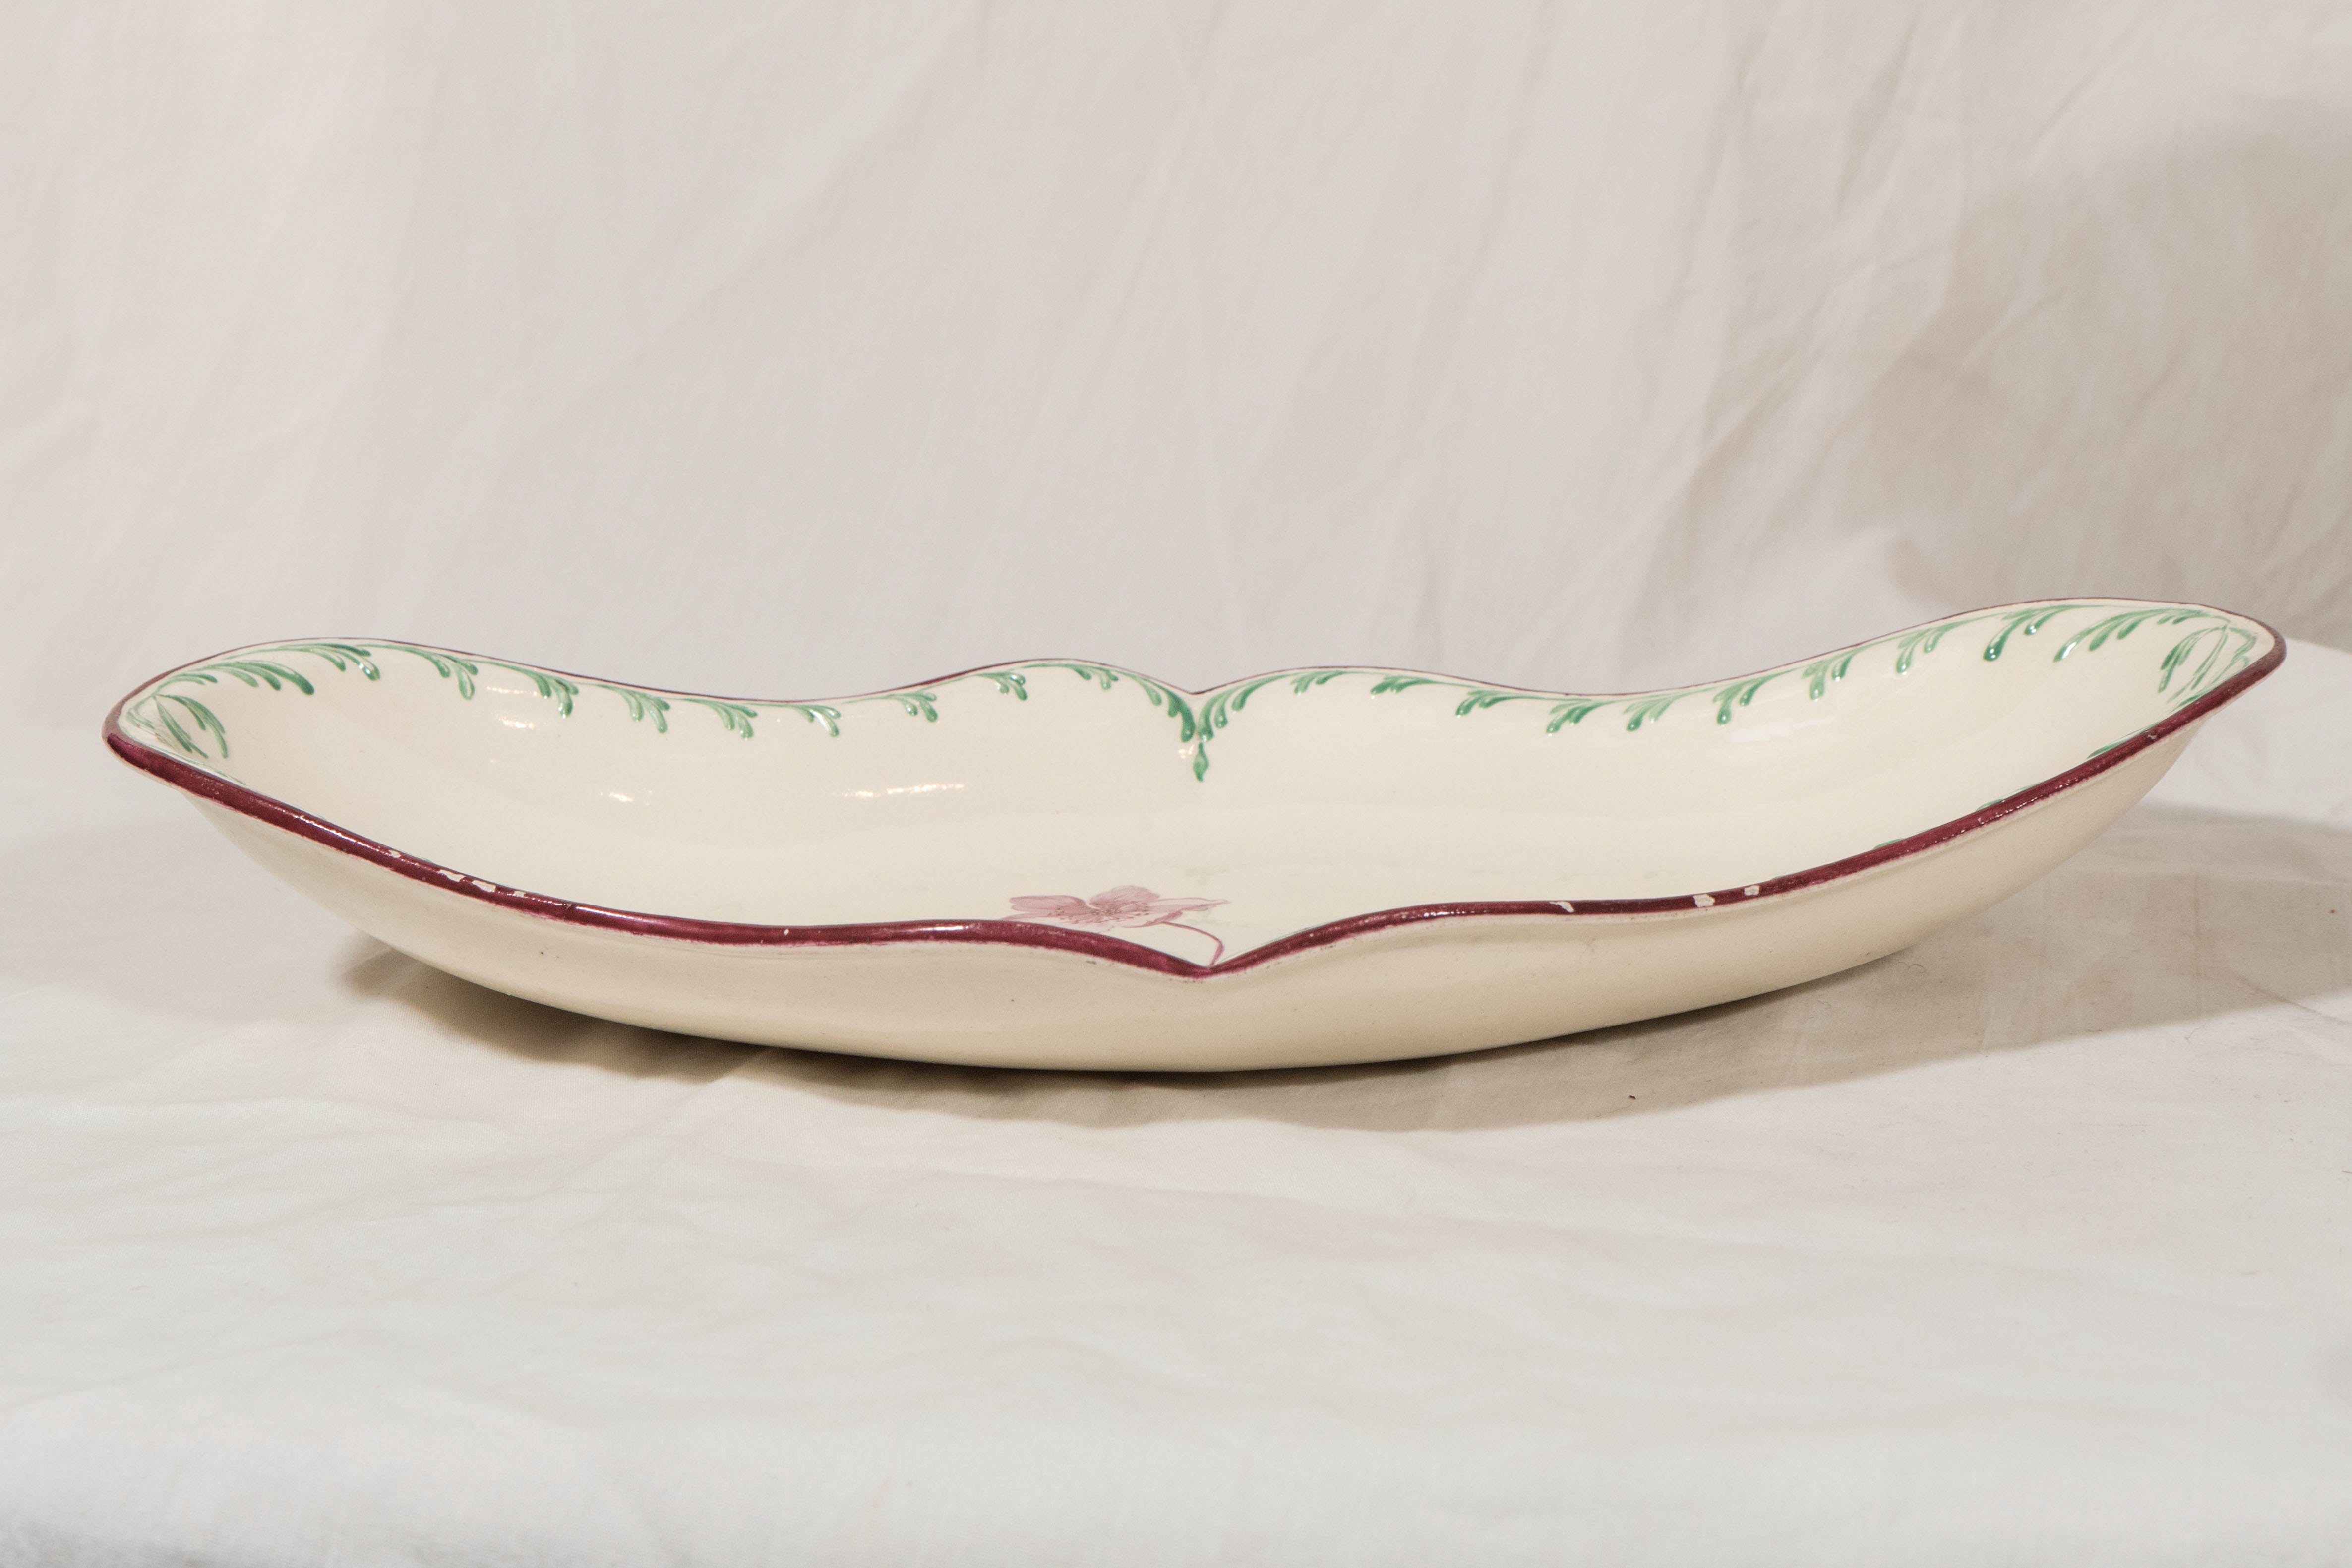 Amtique Wedgwood Creamware Dishes with Green Feather Edge 2